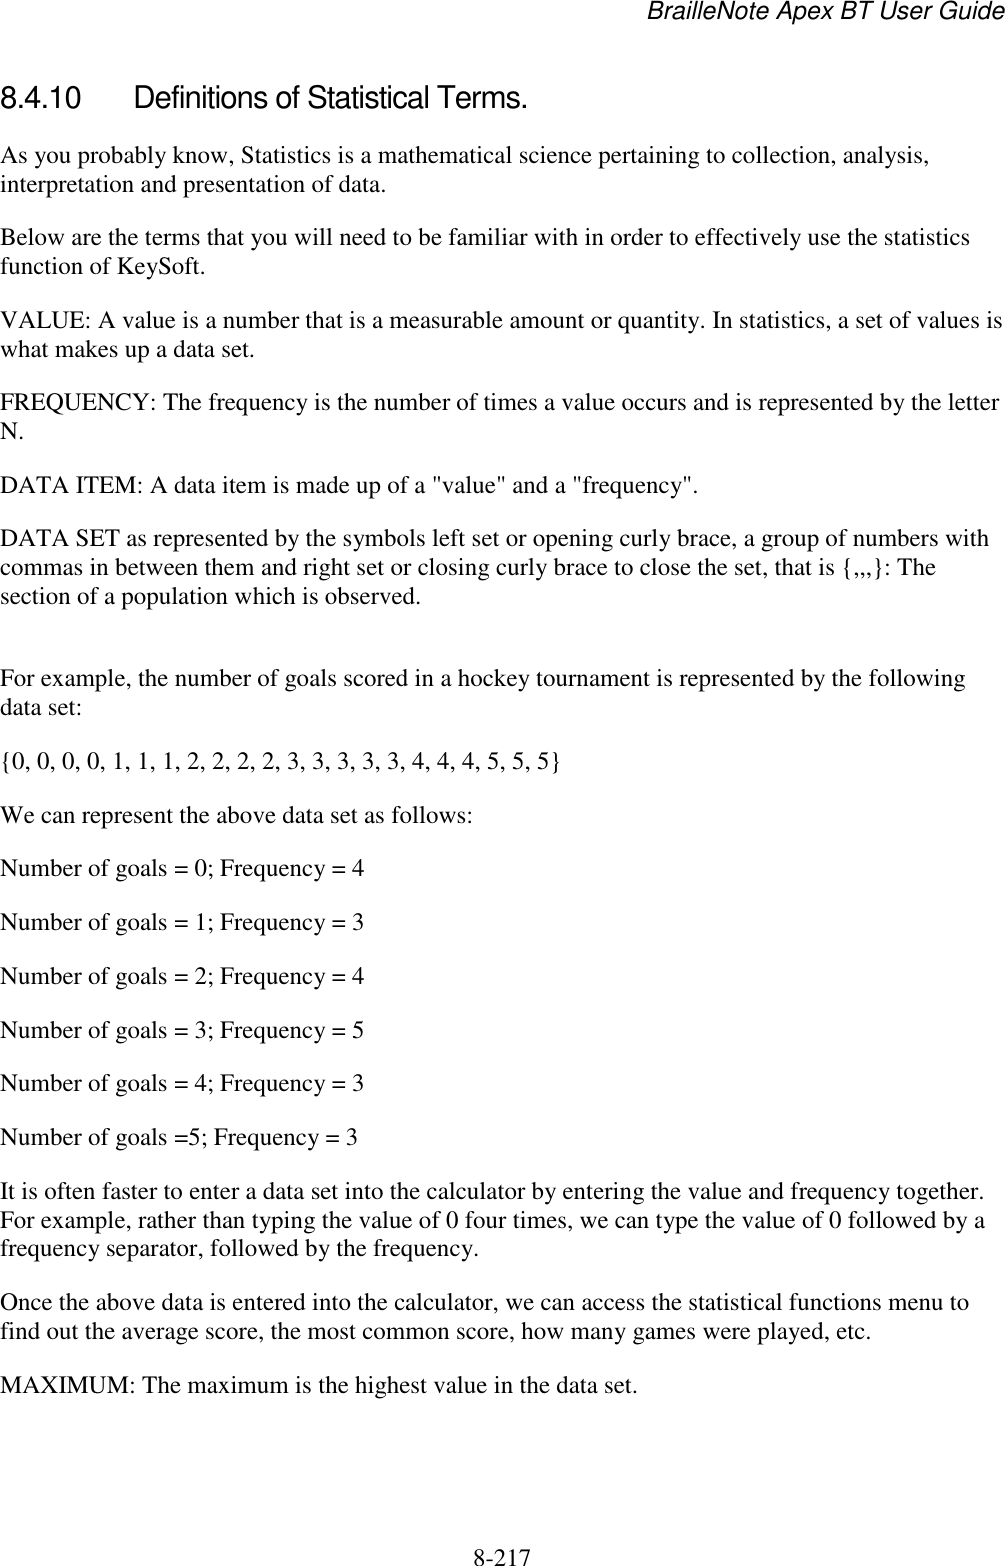 BrailleNote Apex BT User Guide   8-217   8.4.10  Definitions of Statistical Terms. As you probably know, Statistics is a mathematical science pertaining to collection, analysis, interpretation and presentation of data. Below are the terms that you will need to be familiar with in order to effectively use the statistics function of KeySoft. VALUE: A value is a number that is a measurable amount or quantity. In statistics, a set of values is what makes up a data set. FREQUENCY: The frequency is the number of times a value occurs and is represented by the letter N.  DATA ITEM: A data item is made up of a &quot;value&quot; and a &quot;frequency&quot;. DATA SET as represented by the symbols left set or opening curly brace, a group of numbers with commas in between them and right set or closing curly brace to close the set, that is {,,,}: The section of a population which is observed.  For example, the number of goals scored in a hockey tournament is represented by the following data set: {0, 0, 0, 0, 1, 1, 1, 2, 2, 2, 2, 3, 3, 3, 3, 3, 4, 4, 4, 5, 5, 5} We can represent the above data set as follows: Number of goals = 0; Frequency = 4         Number of goals = 1; Frequency = 3 Number of goals = 2; Frequency = 4 Number of goals = 3; Frequency = 5 Number of goals = 4; Frequency = 3 Number of goals =5; Frequency = 3 It is often faster to enter a data set into the calculator by entering the value and frequency together. For example, rather than typing the value of 0 four times, we can type the value of 0 followed by a frequency separator, followed by the frequency. Once the above data is entered into the calculator, we can access the statistical functions menu to find out the average score, the most common score, how many games were played, etc. MAXIMUM: The maximum is the highest value in the data set. 